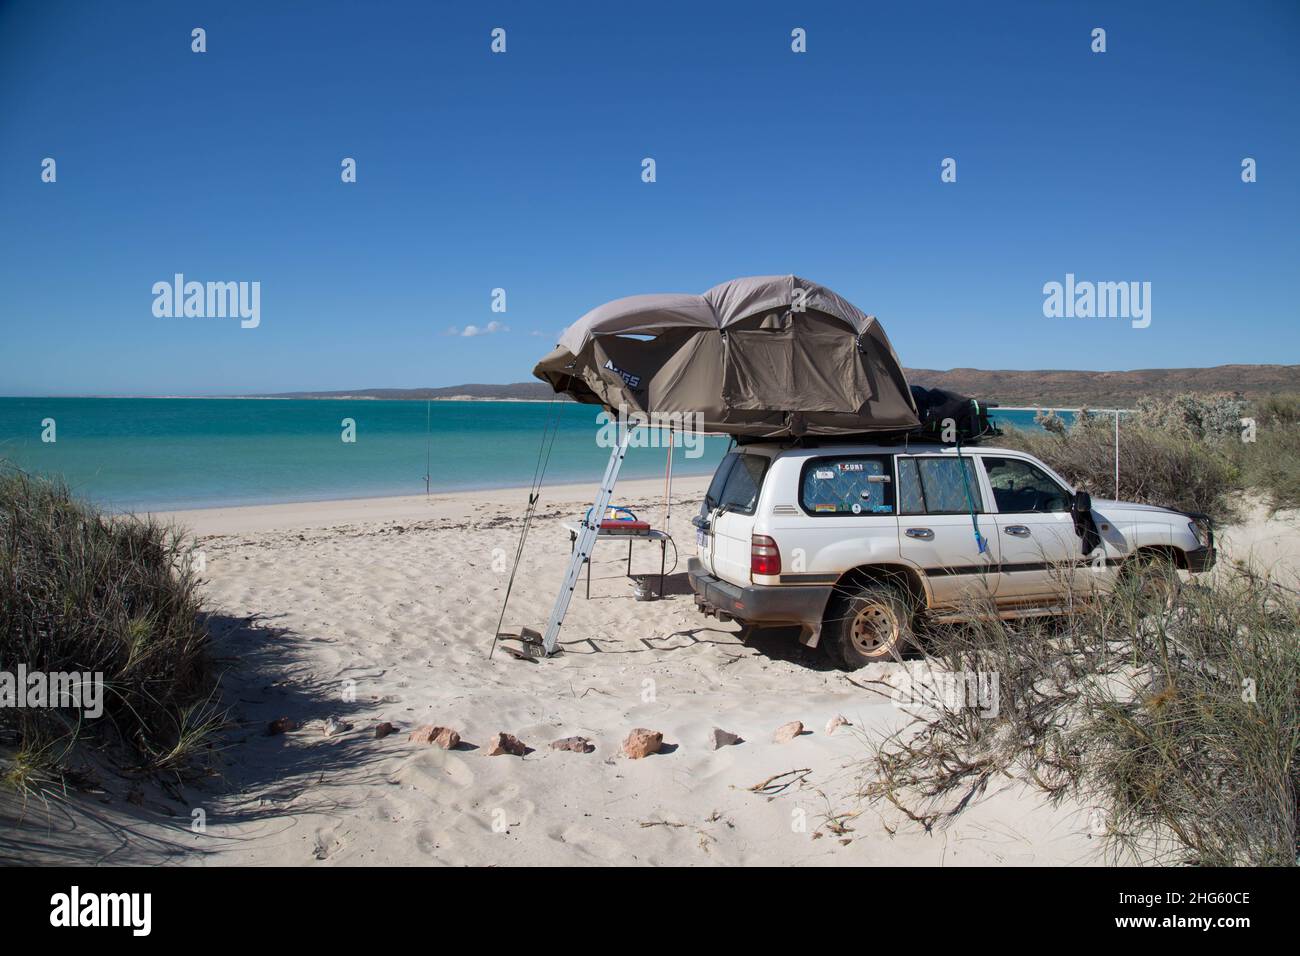 Camping with a rooftoptent on a beach in Australia Stock Photo